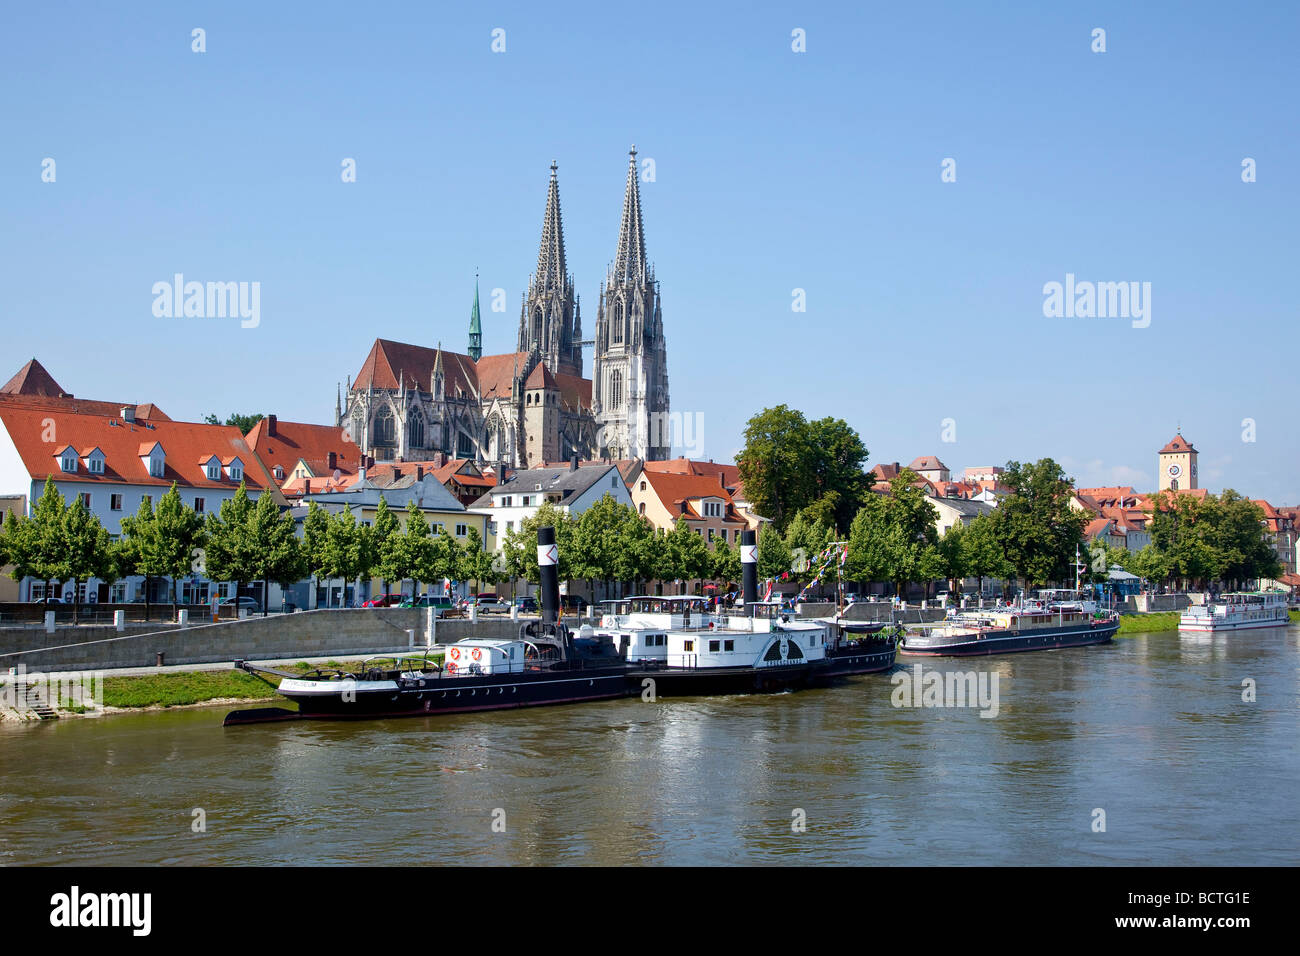 Regensburger Dom Cathedral of Saint Peter with the Schifffahrtsmuseum maritime museum on the Danube river in Regensburg, Bavari Stock Photo